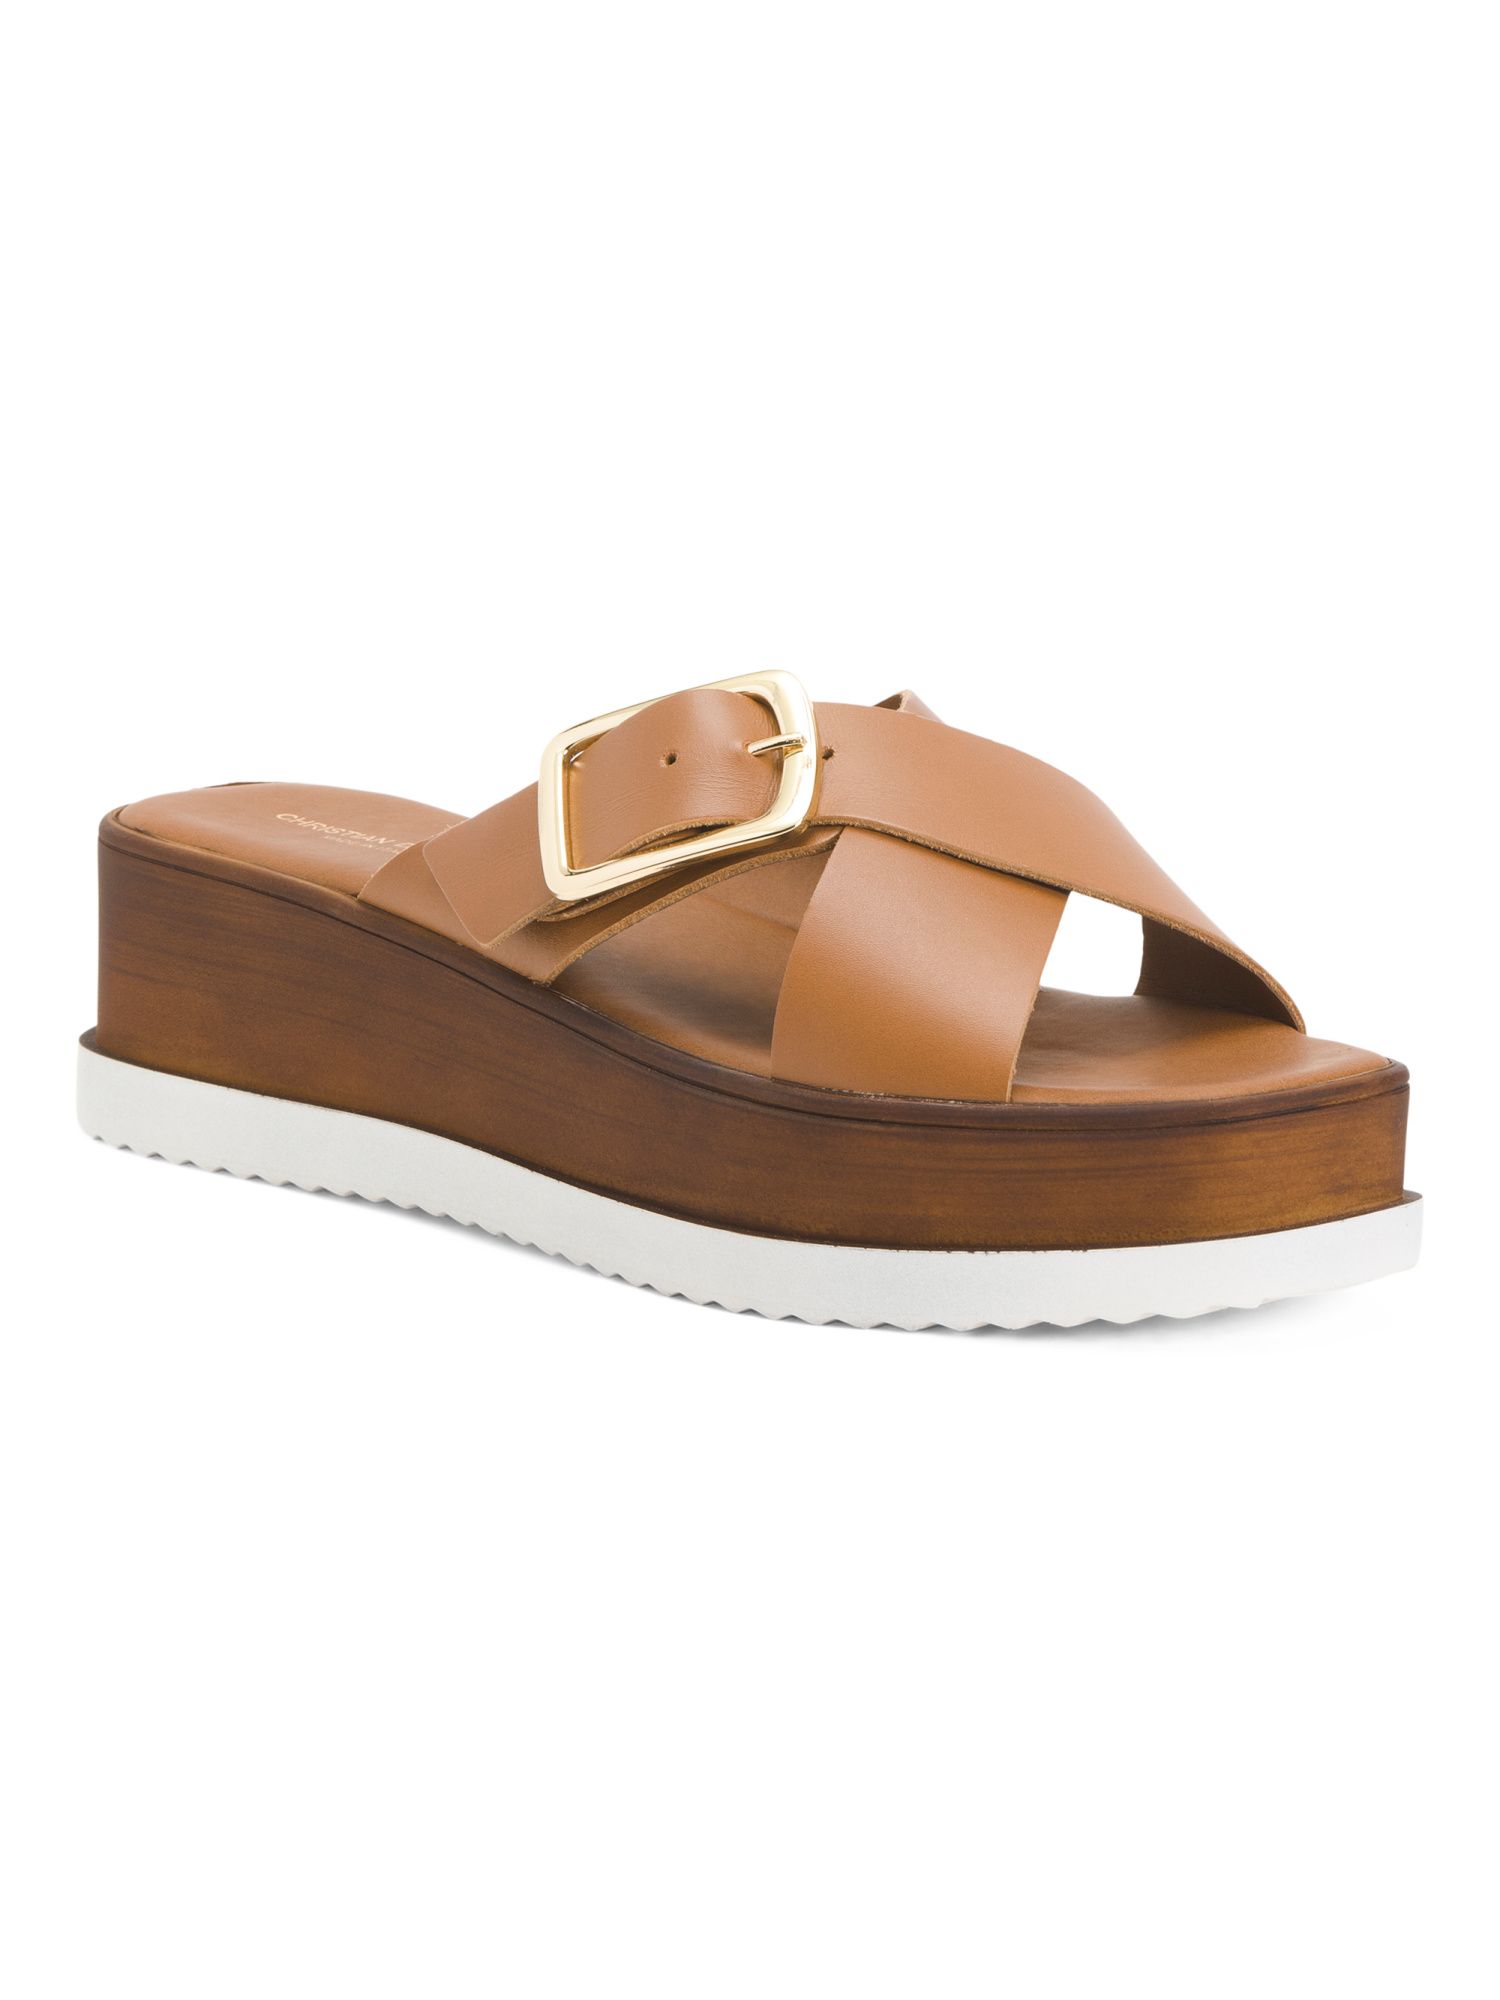 Made In Italy Tax Cross Band Sandals | TJ Maxx